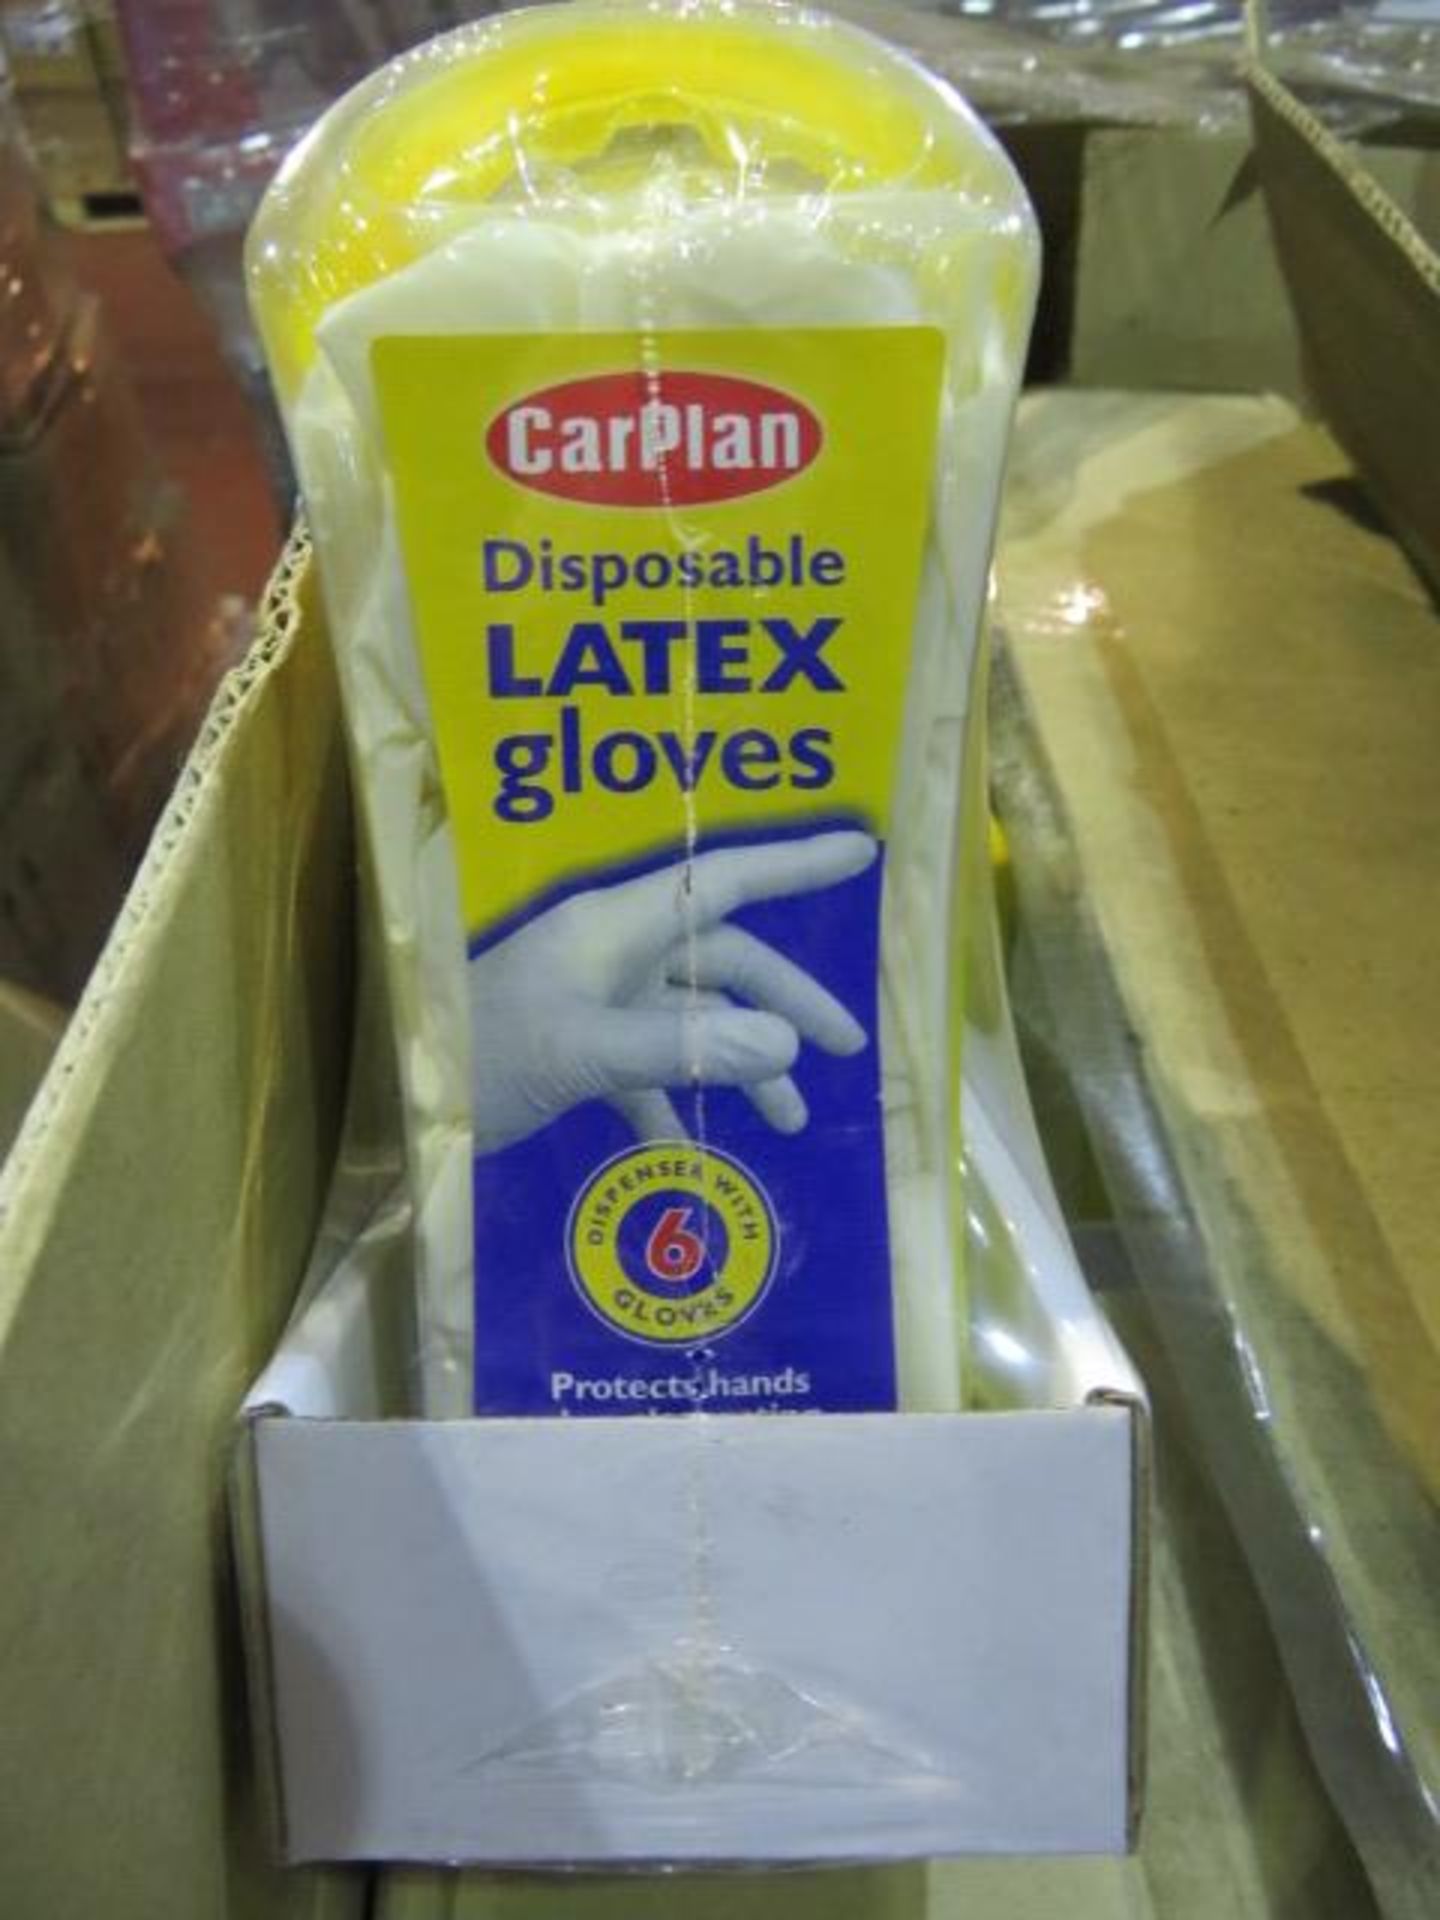 (314) PALLET TO CONTAIN 648 x CARPLAN 6 PAIRS OF DISPOSABLE LATEX GLOVES. RRP £2.99 PER PACK. ...